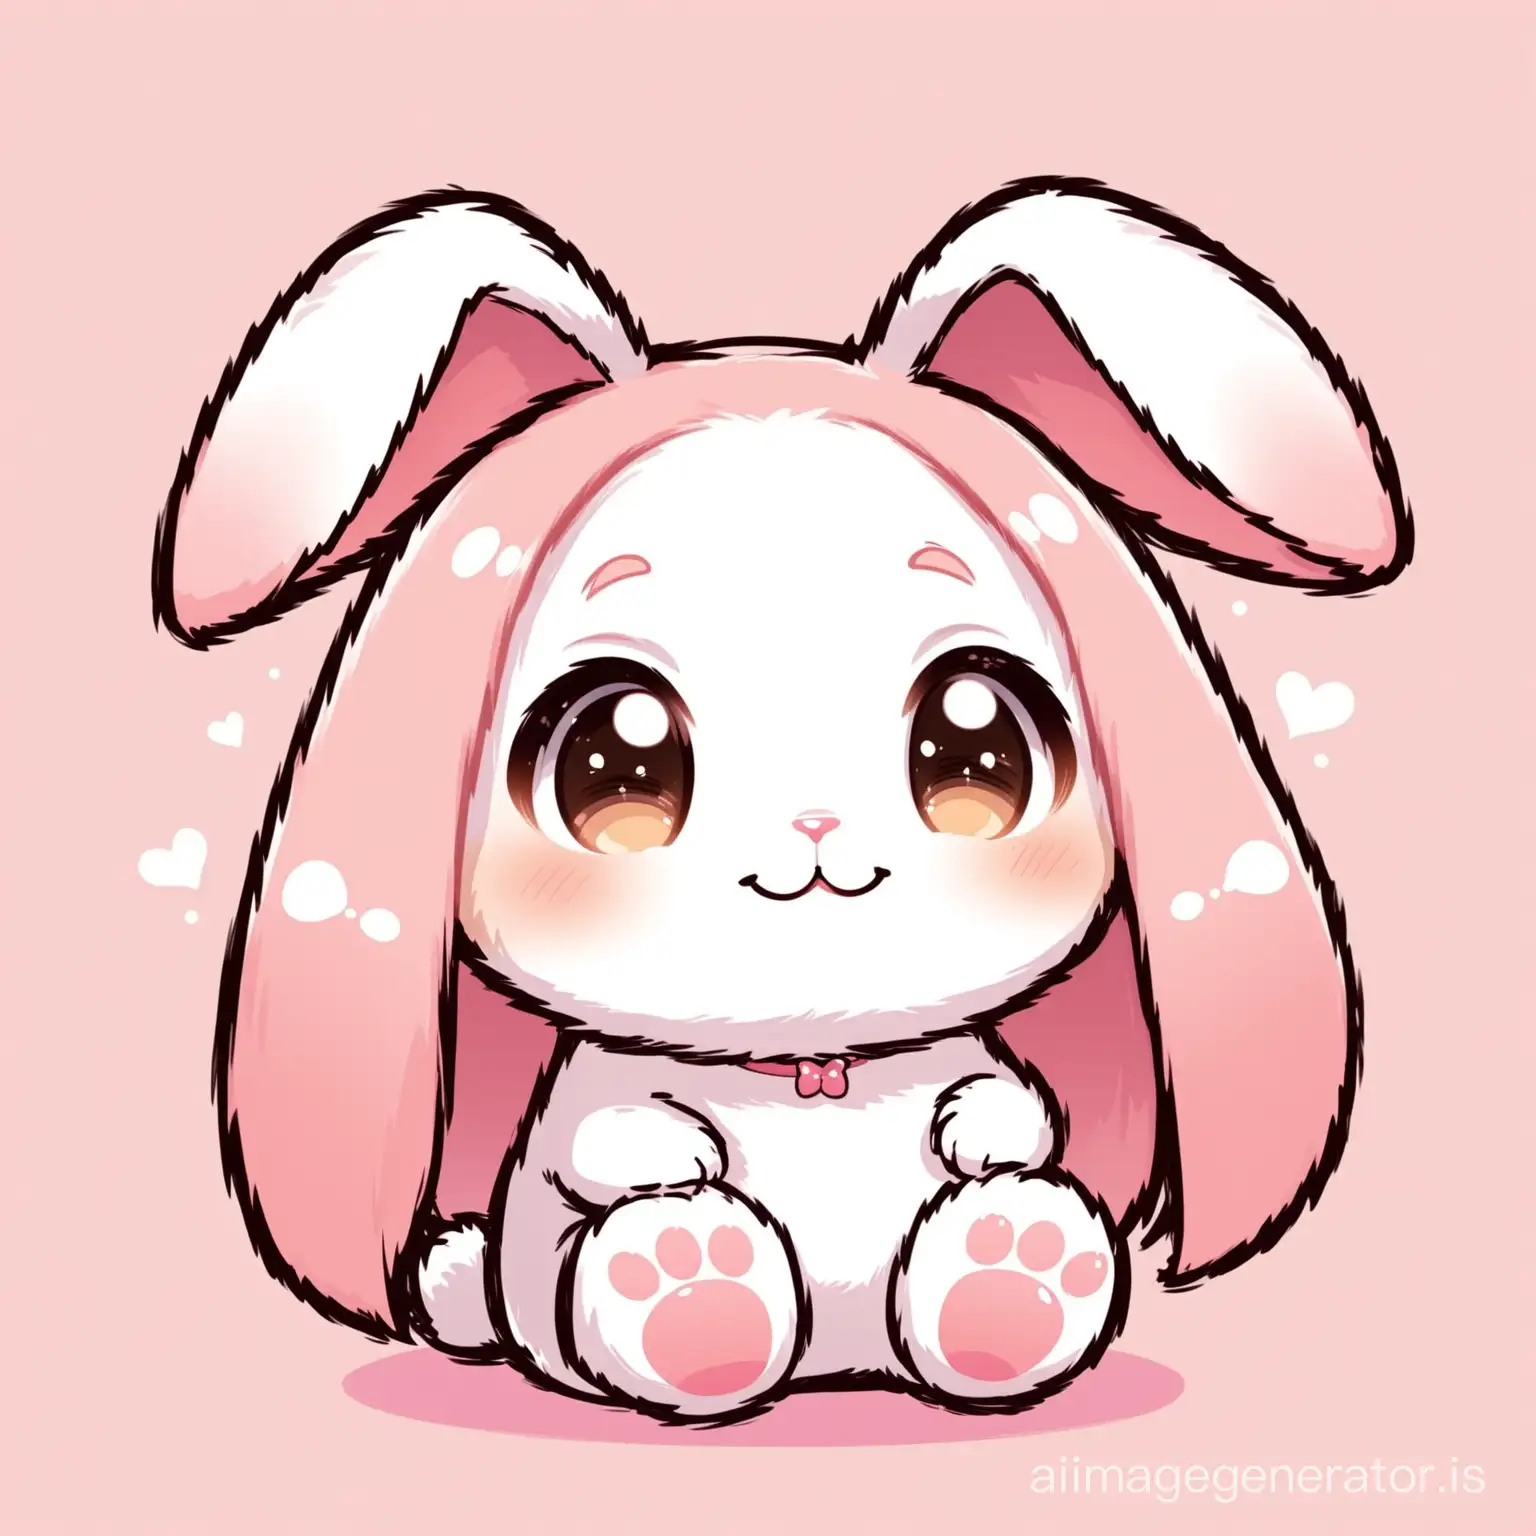 I need a avatar, catoon rabbit, bunny pink color, smiling, super cute